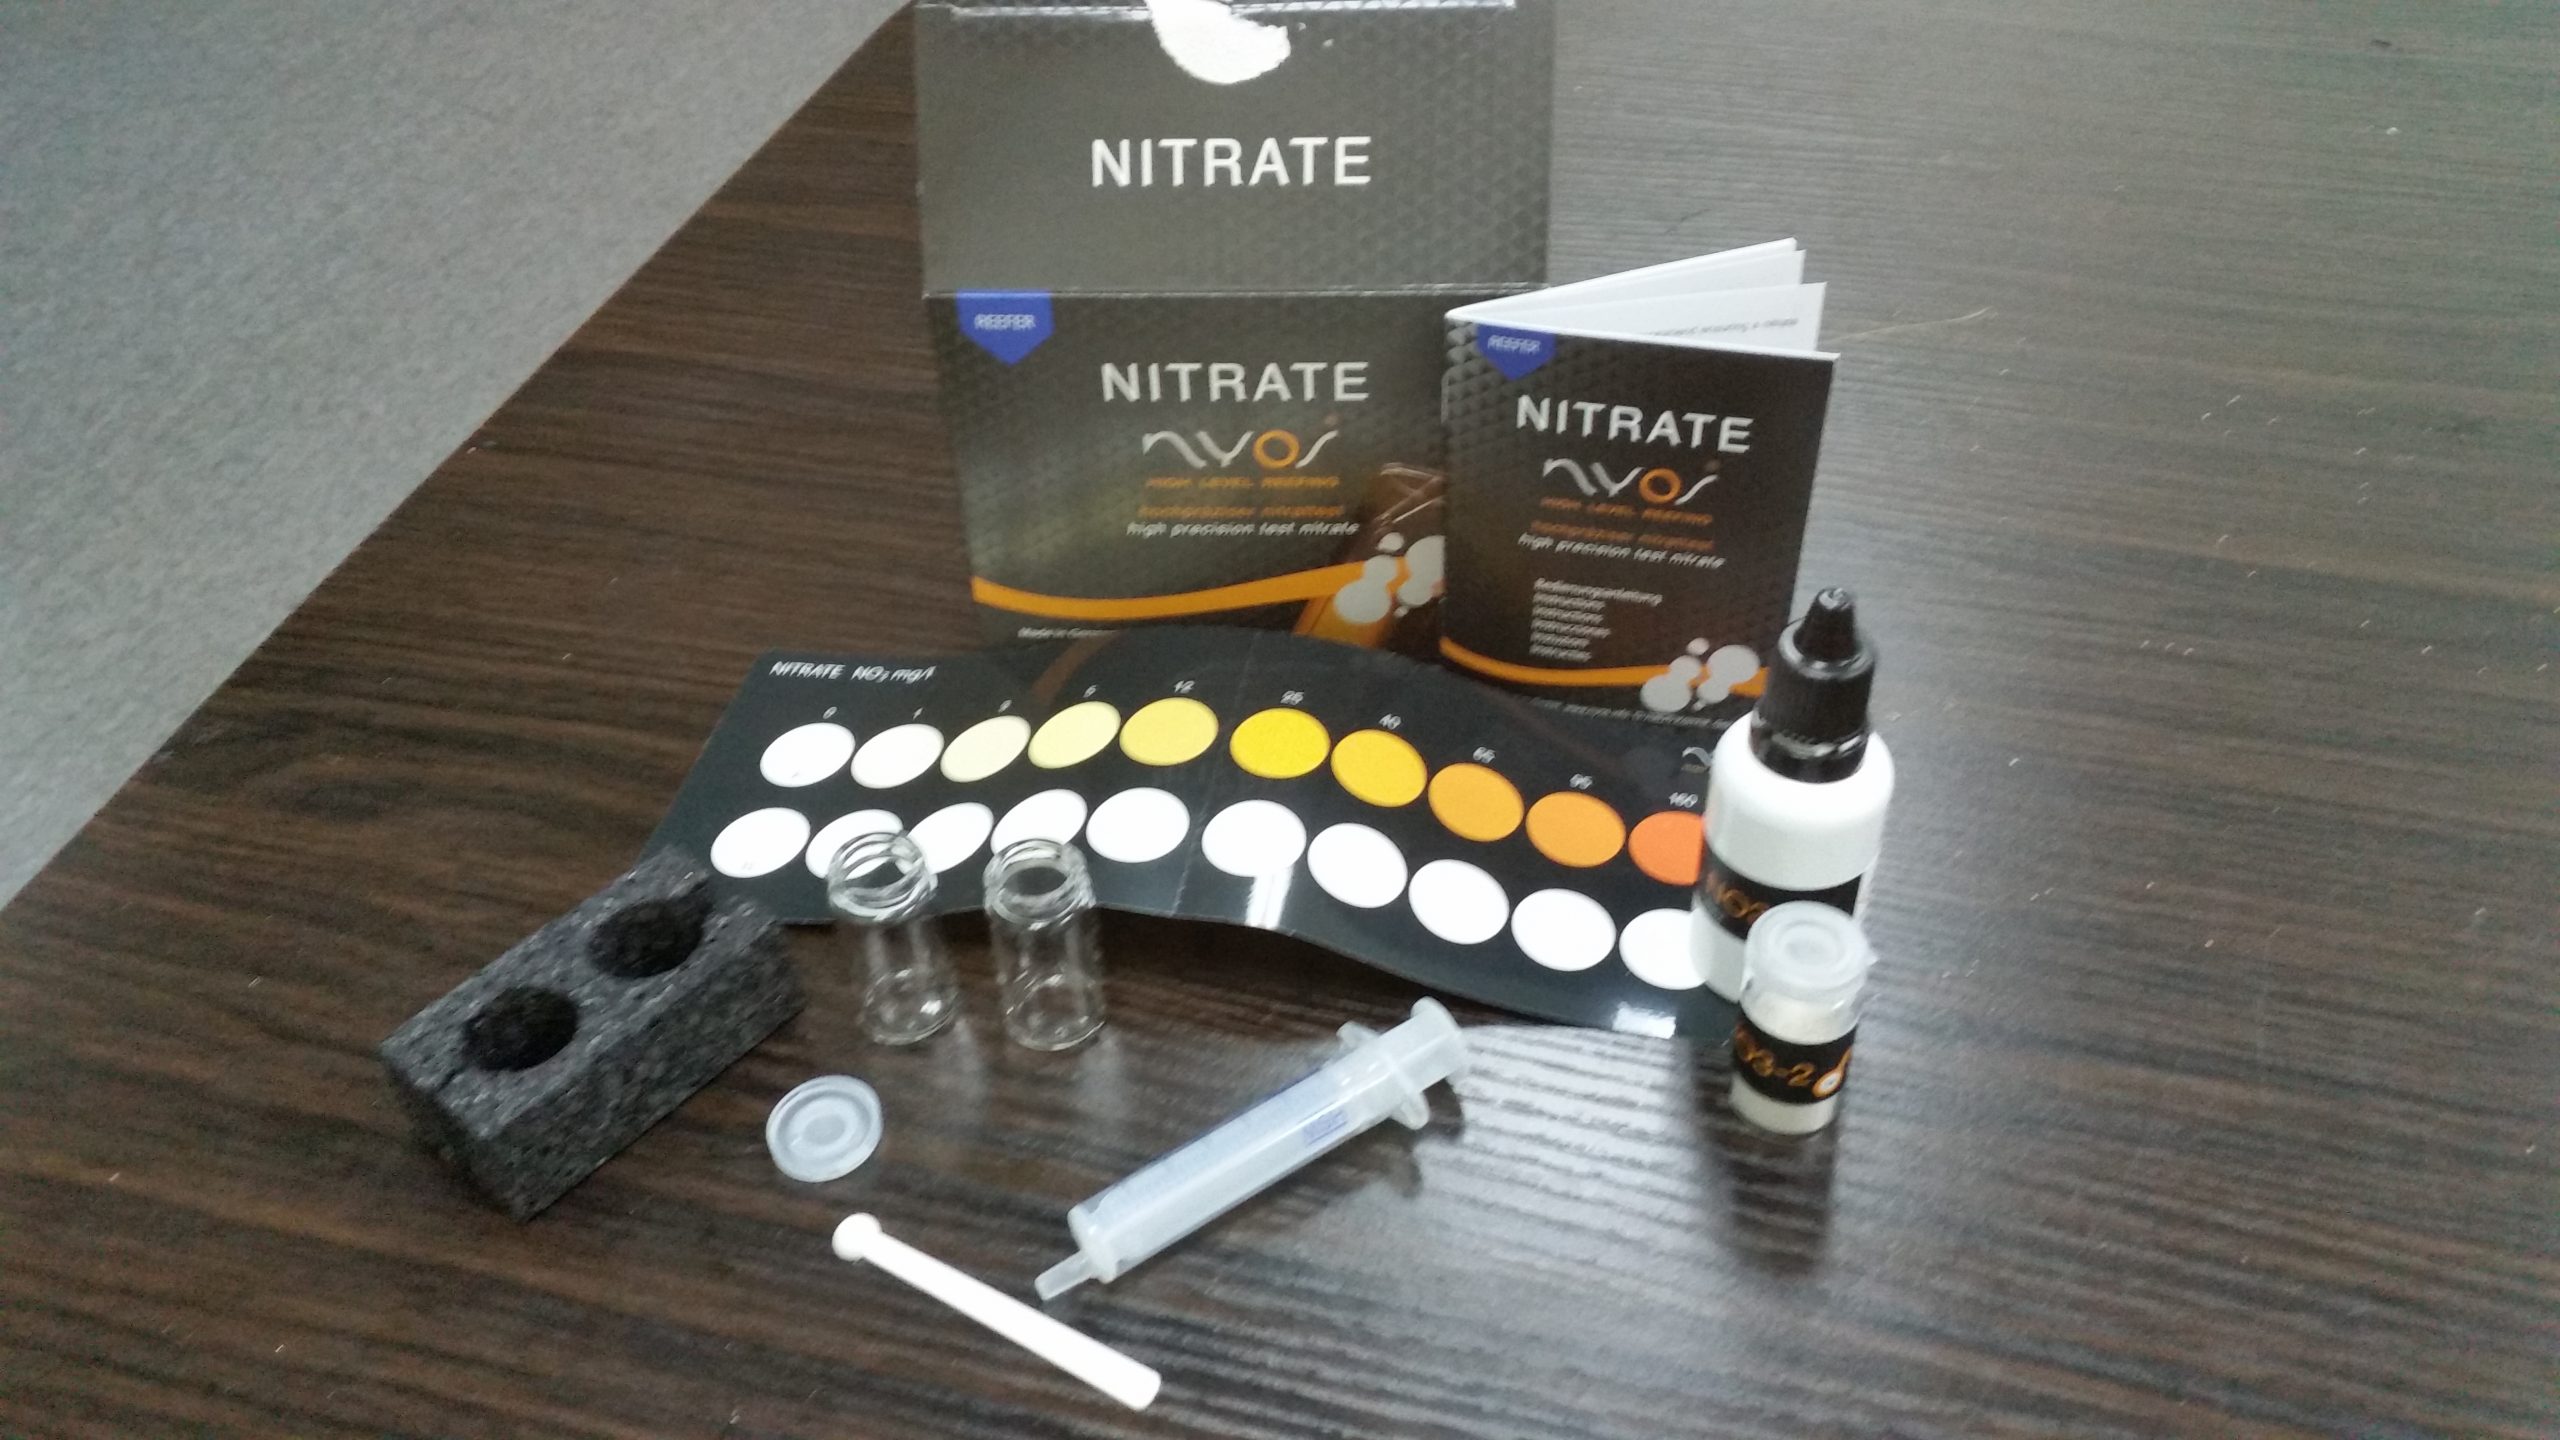 Product Review ; Nyos Nitrate Test kit Vs Salifest Nitrate Test kit